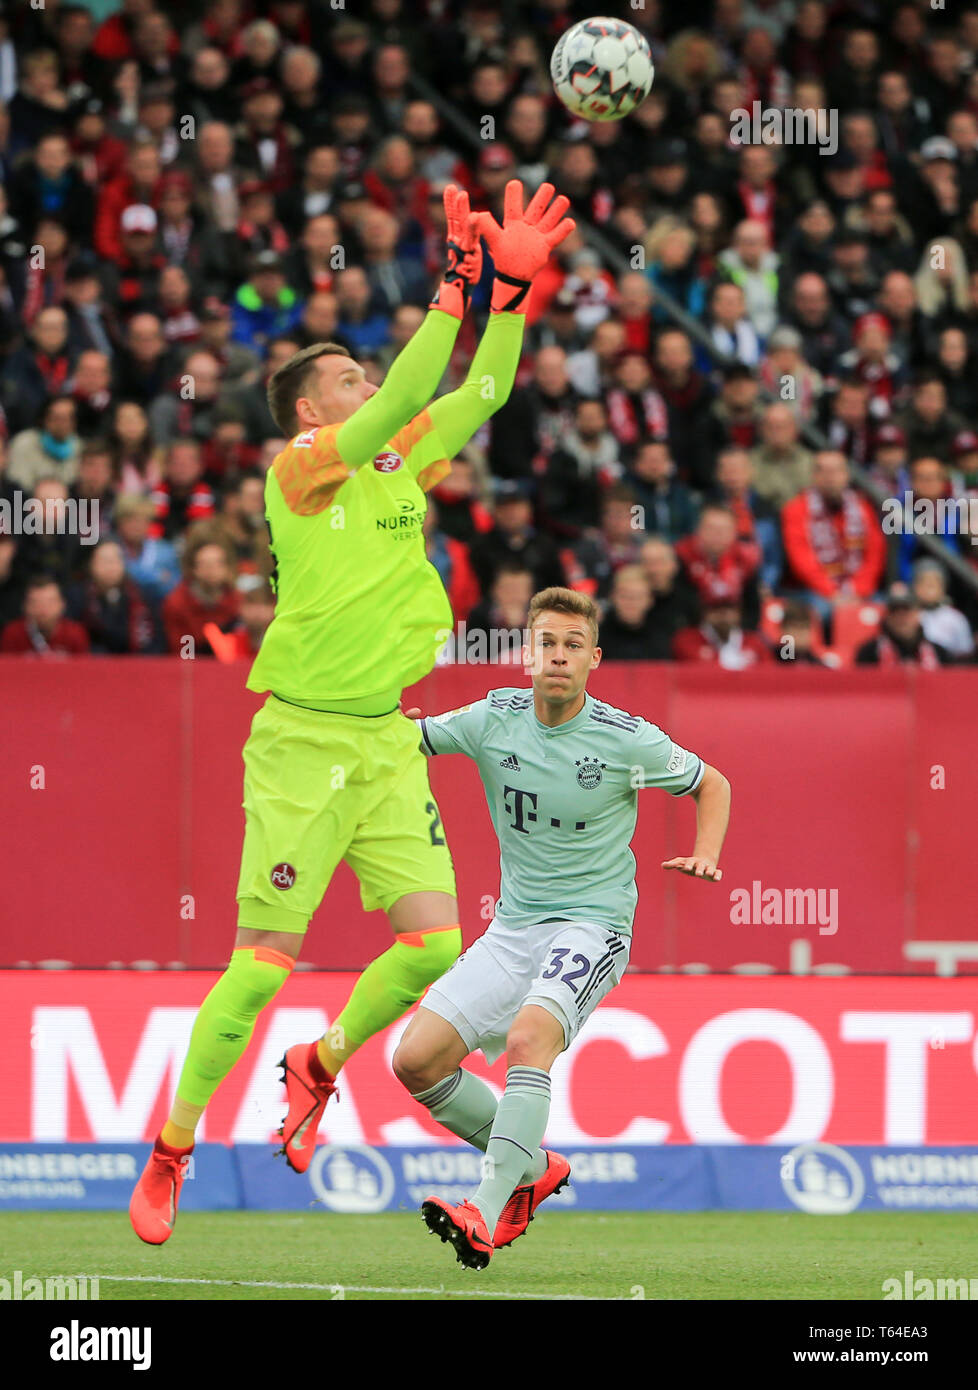 Nuremberg, Germany. 28th Apr, 2019. Bayern Munich's Joshua Kimmich (R) and Nuremberg's Christian Mathenia compete during a German Bundesliga match between 1.FC Nuremberg and FC Bayern Munich in Nuremberg, Germany, on April 28, 2019. The match ended 1-1. Credit: Philippe Ruiz/Xinhua/Alamy Live News Stock Photo